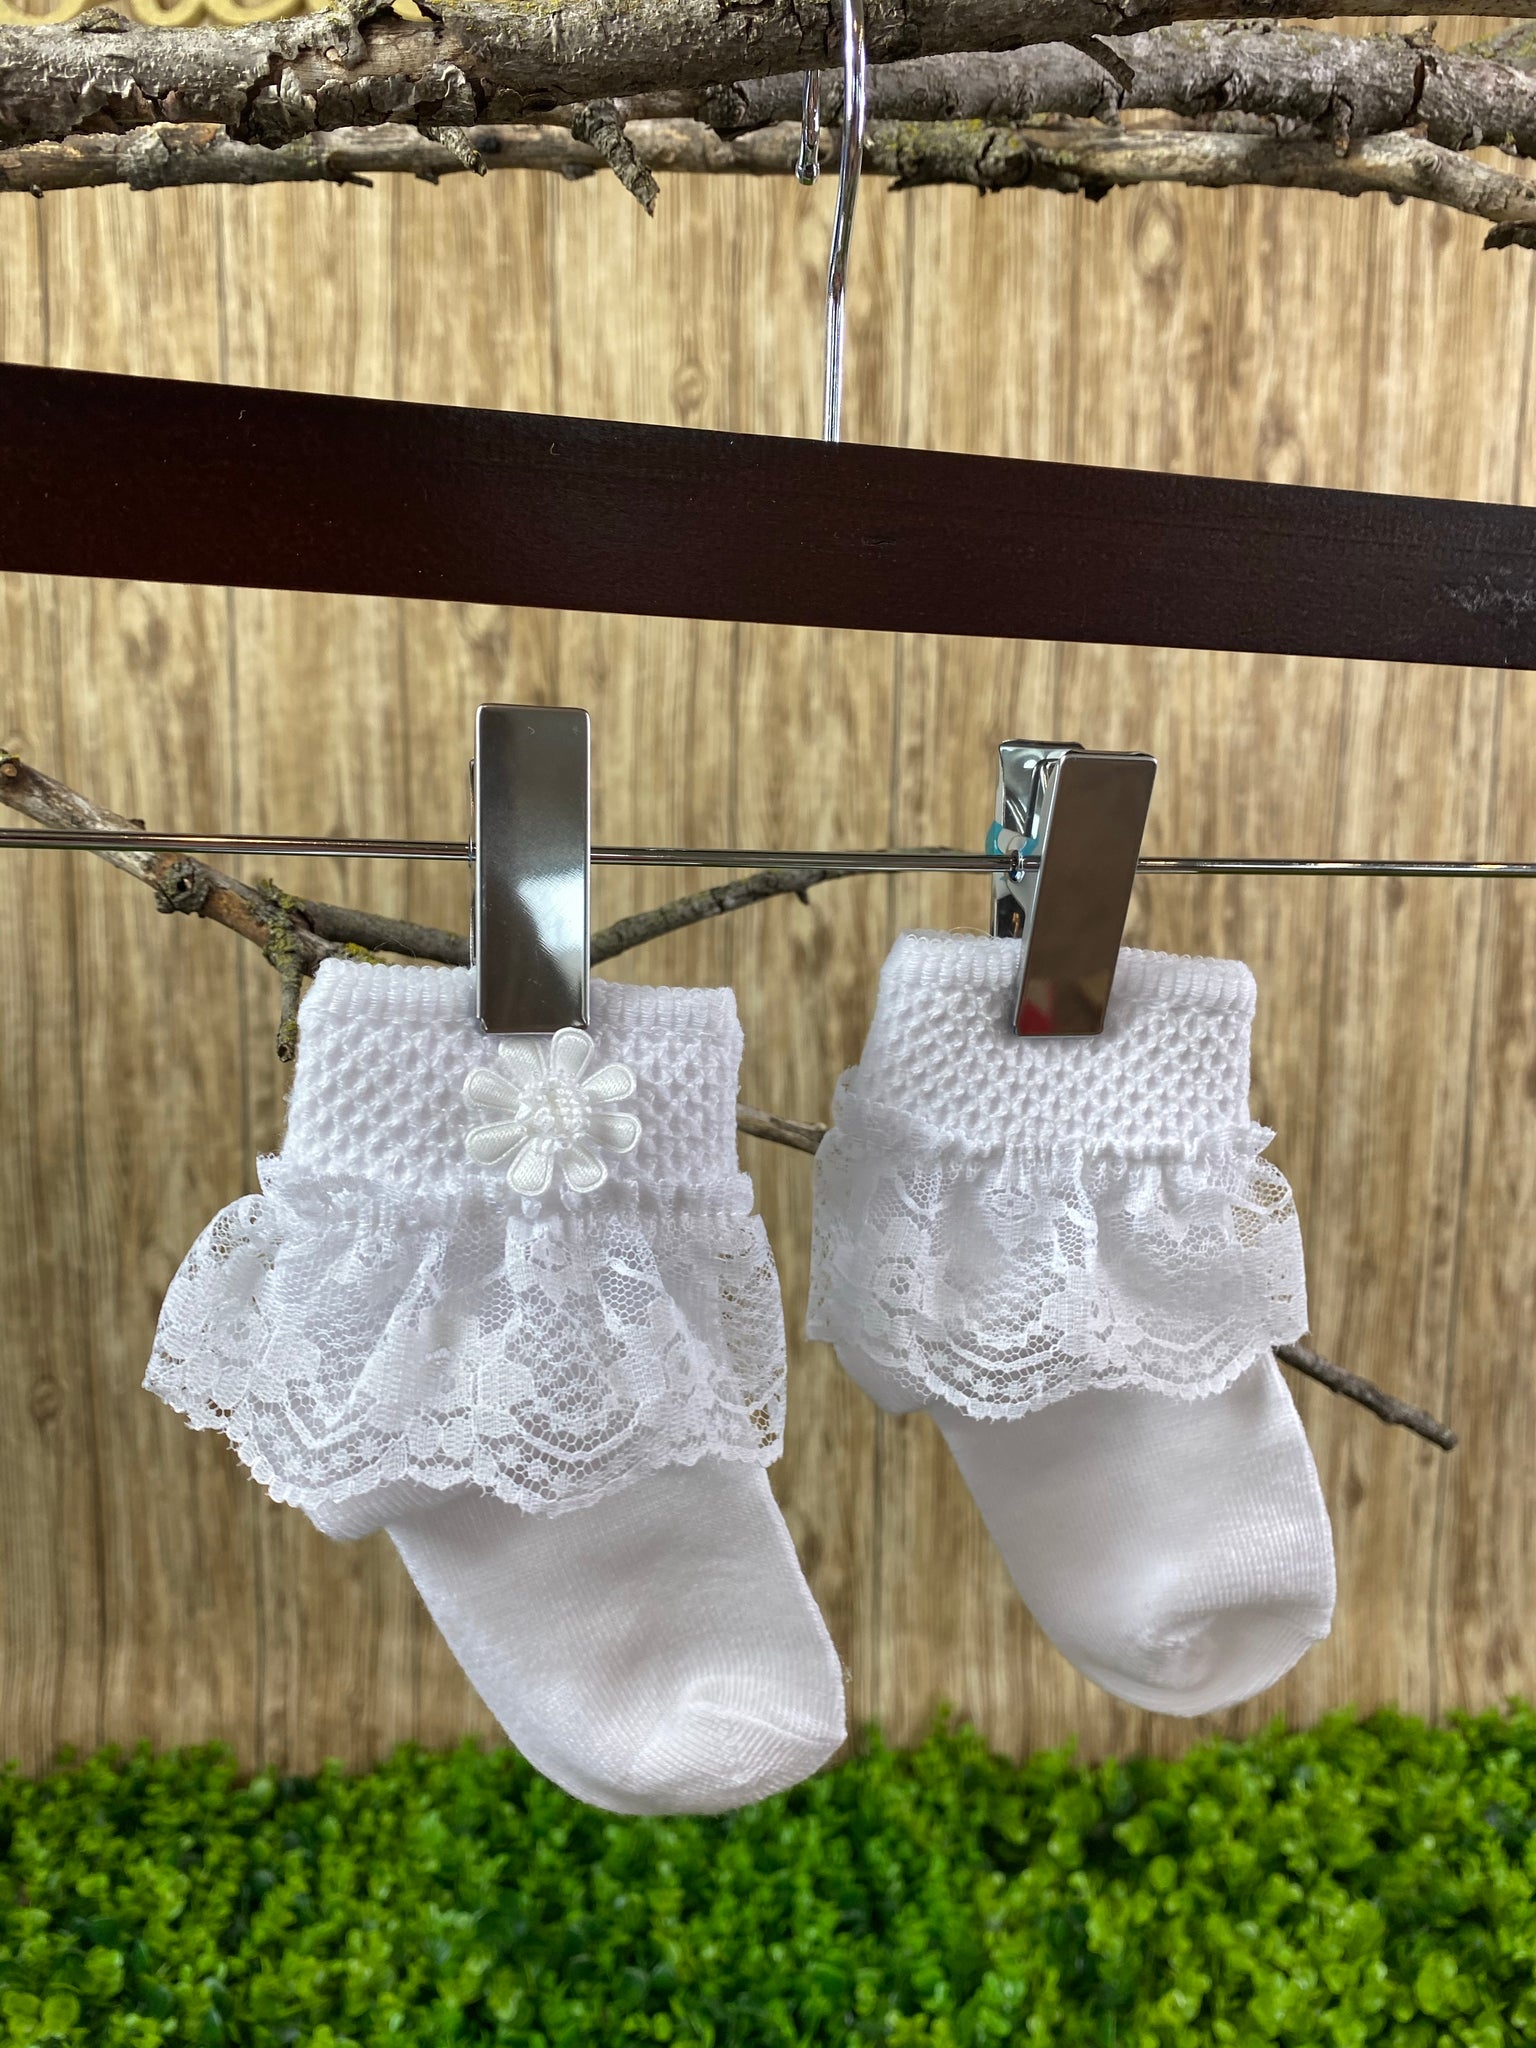 Baptism Socks - White Socks with Flower  These custom ivory socks are detailed with beautiful, embroidered flowers and lace along the edge.  These are perfect for your little girl's outfit!  These socks are available in size 1-3, 4-6, and 6-8 (shoe size).